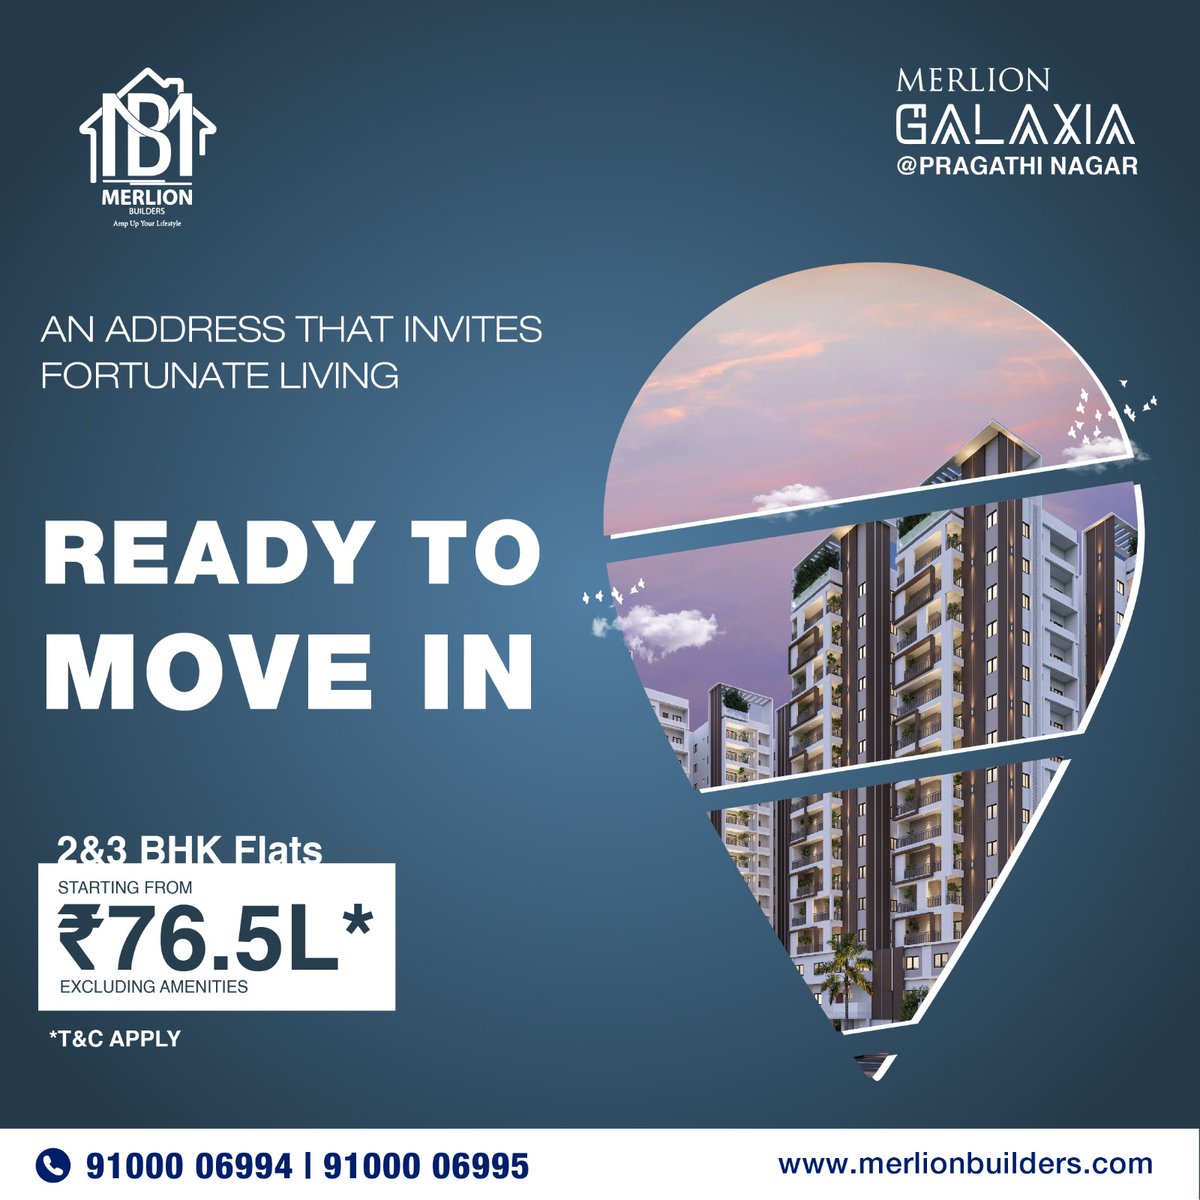 Designed with uber-luxurious amenities and situated in a bustling locale, Merlion Galaxia offers a gateway to a life of fortune.

For more details visit our website : merlionbuilders.com

#merlionbuilders #pragathinagar #flatsforsale #apartmentsforsale #highrisebuildings